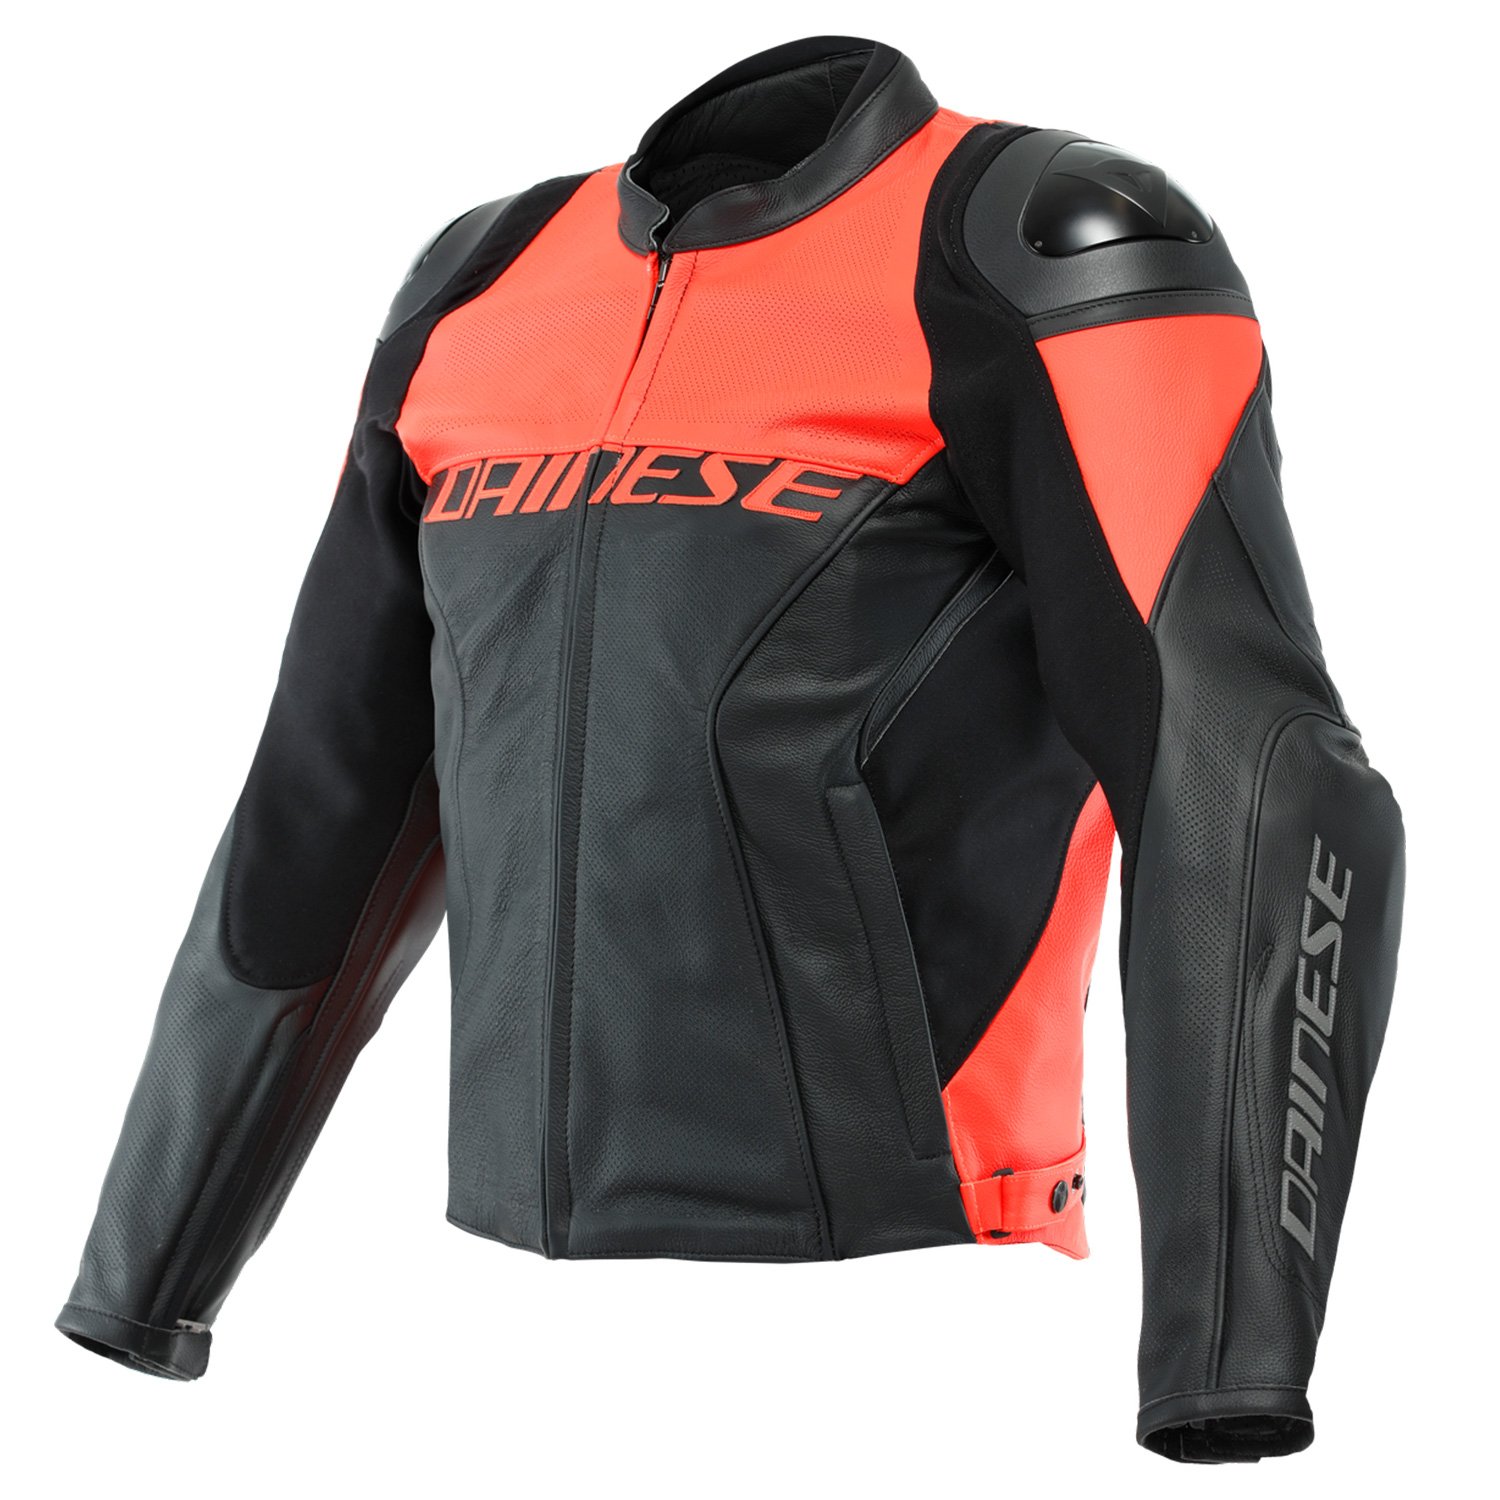 Image of Dainese Racing 4 Perforated Leather Jacket Black Fluo Red Size 48 ID 8051019302922